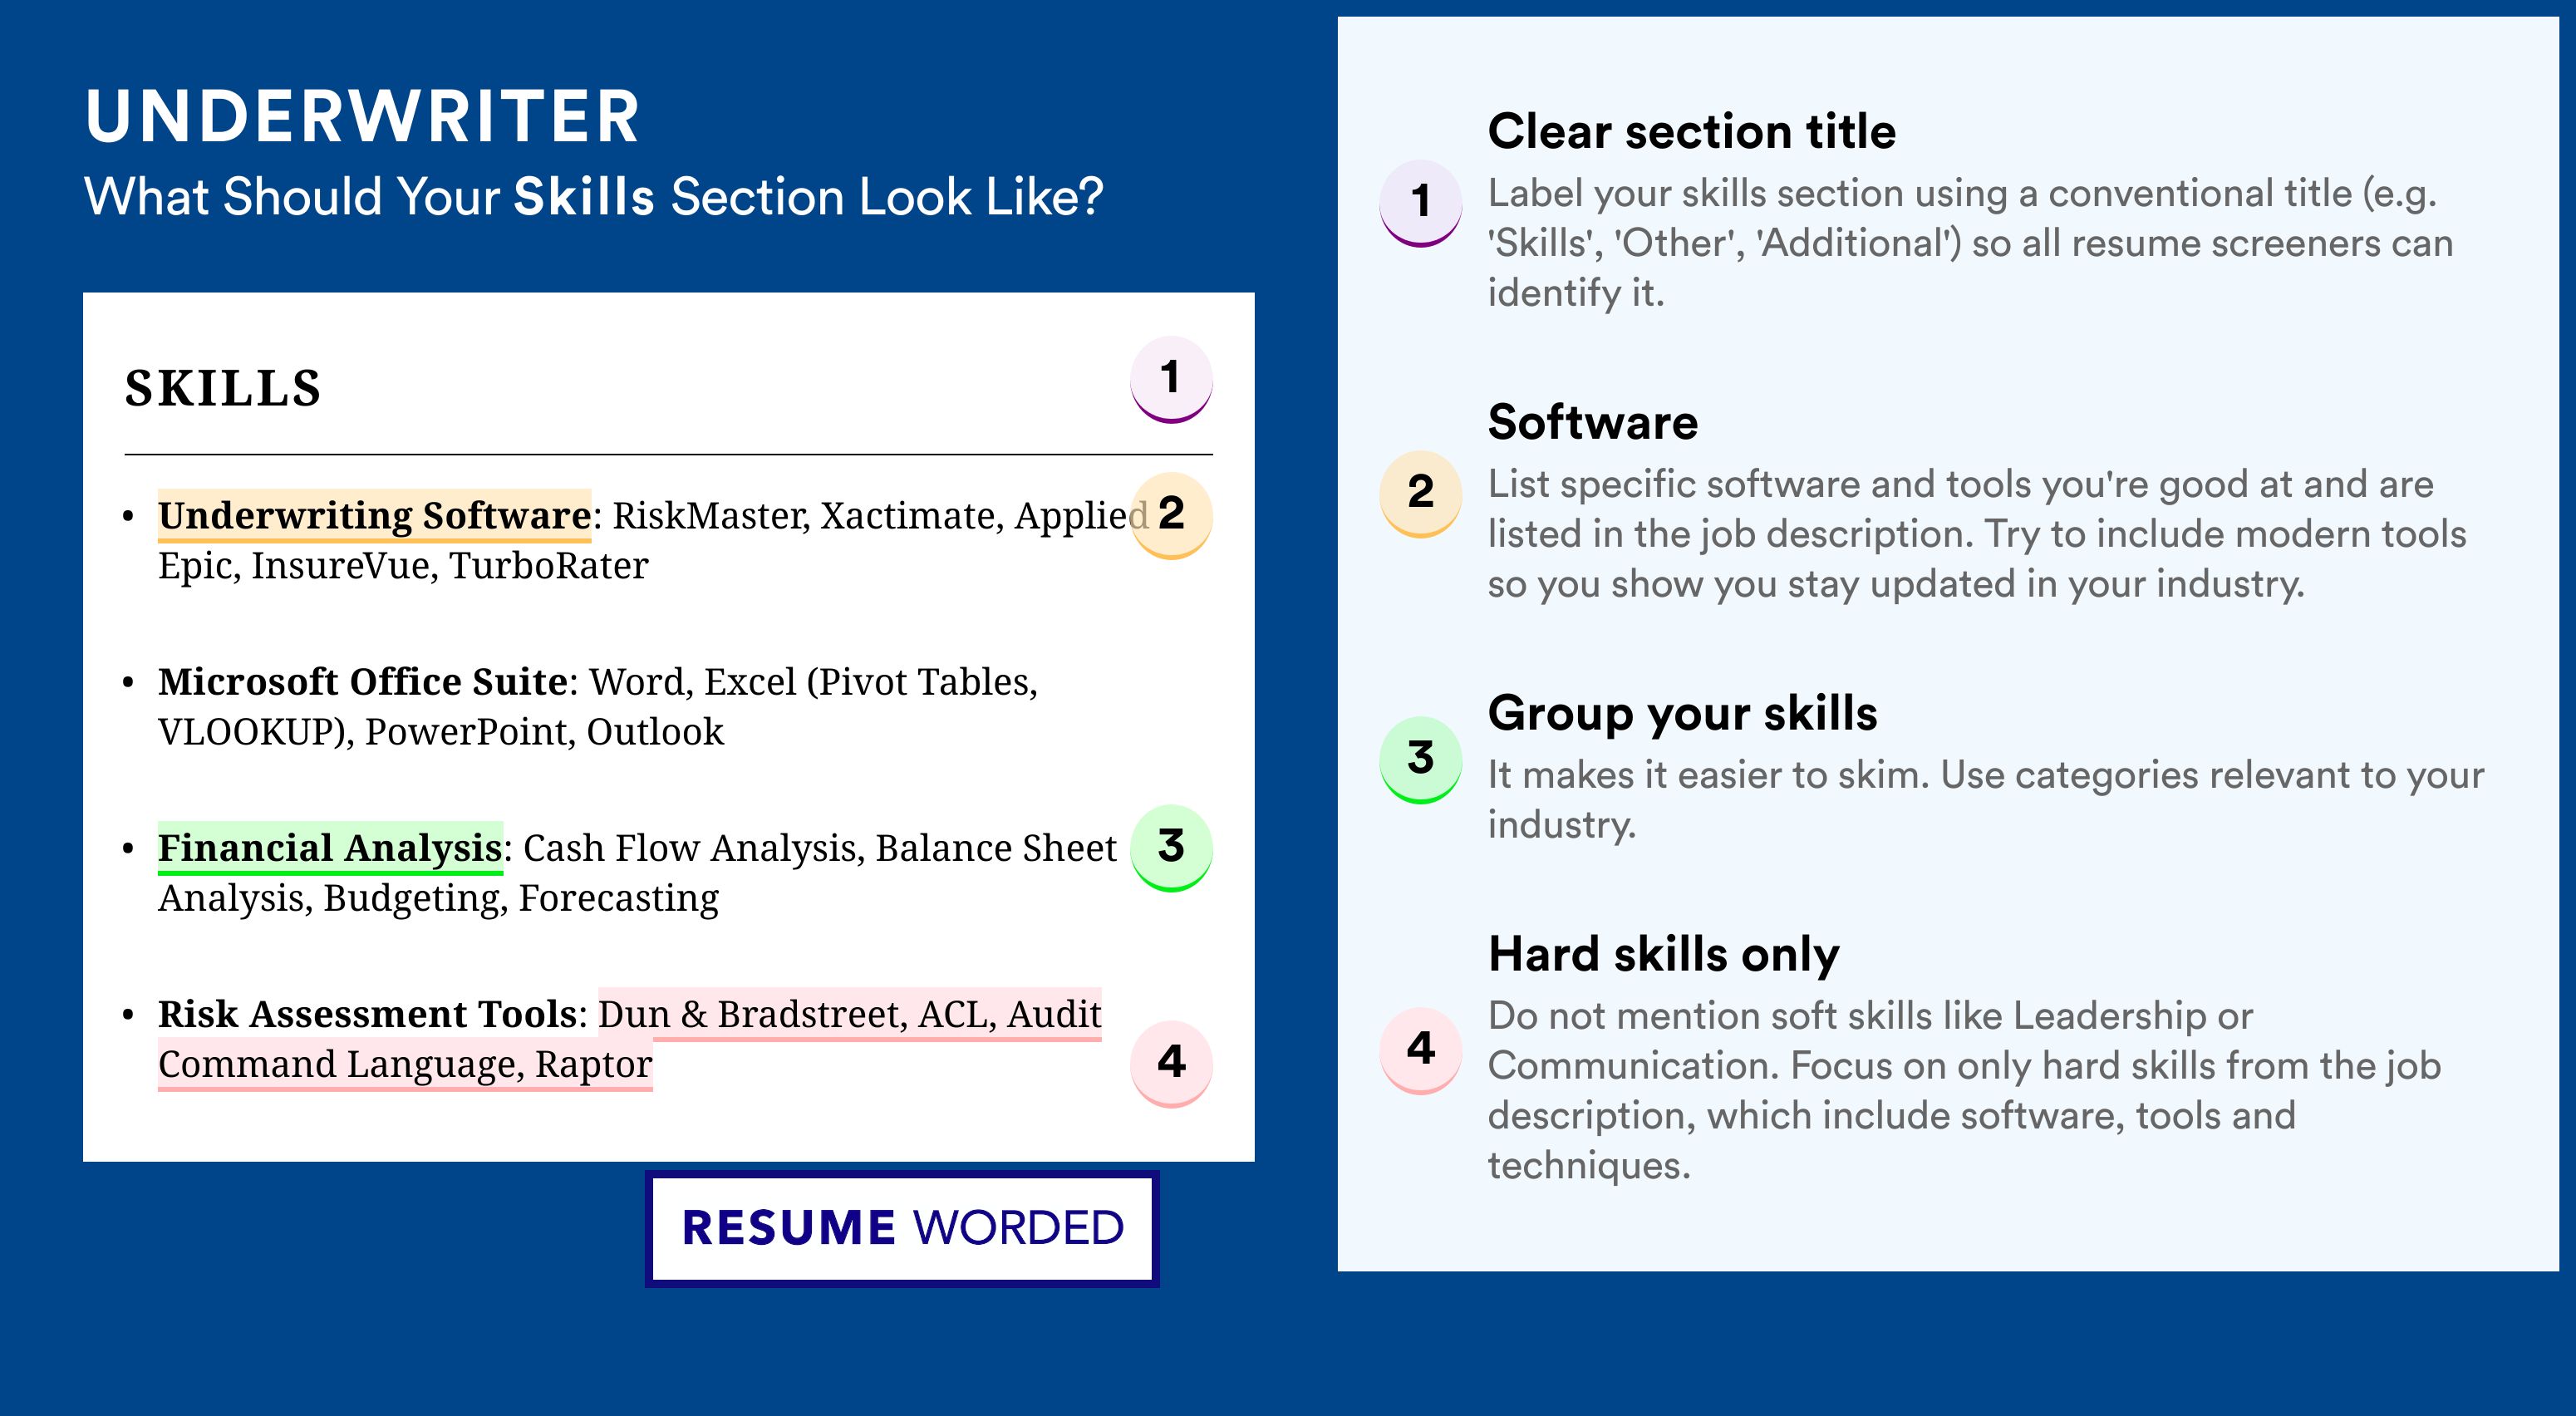 How To Write Your Skills Section - Underwriter Roles